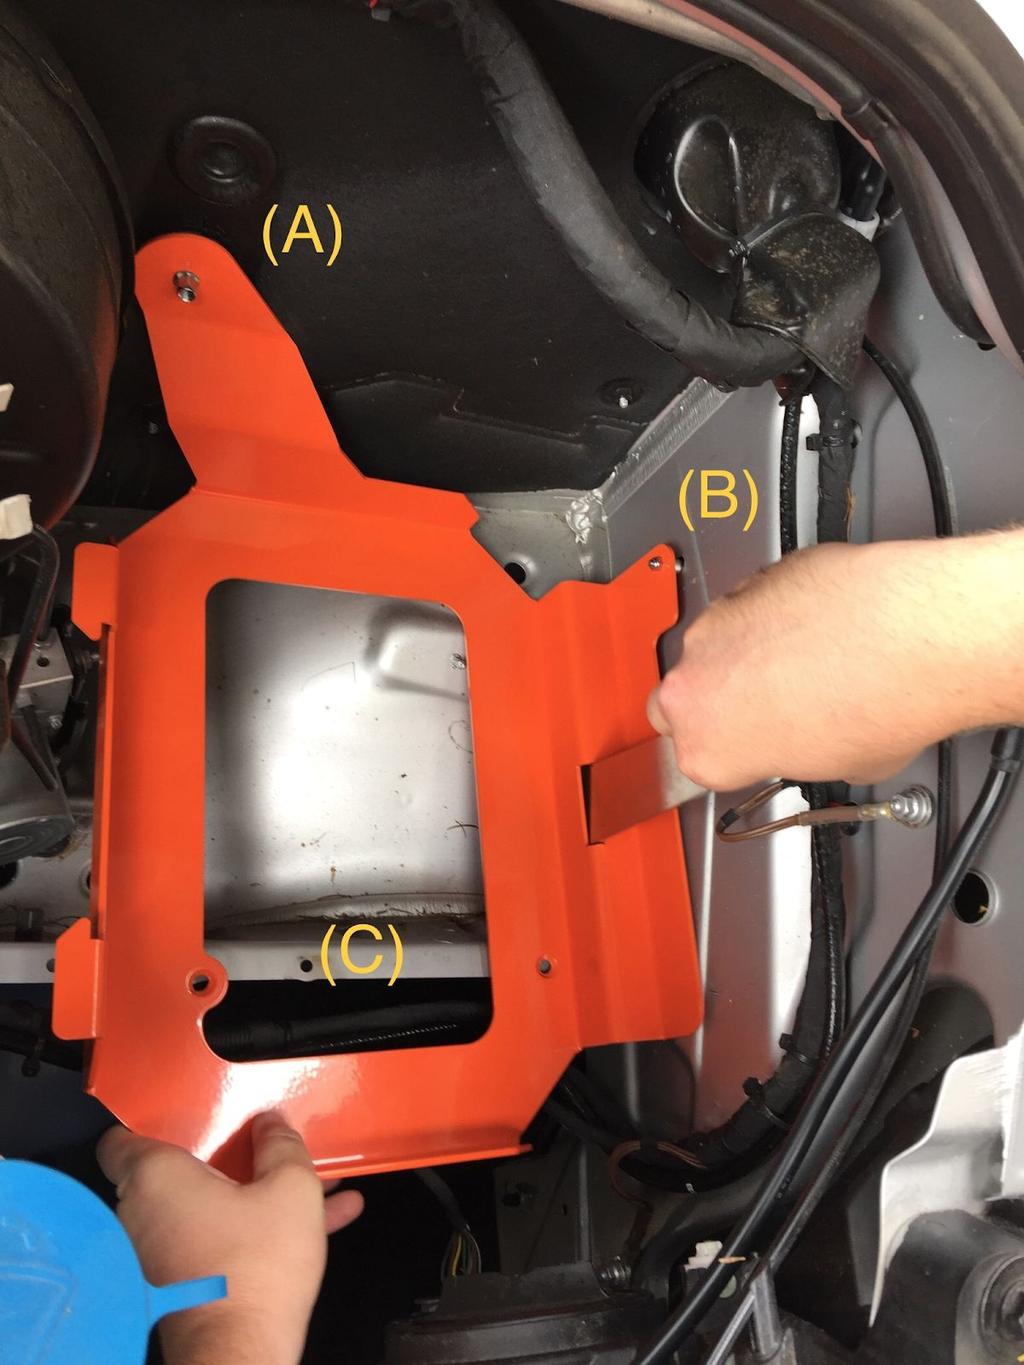 6. Place the tray tray into the driver side engine compartment.